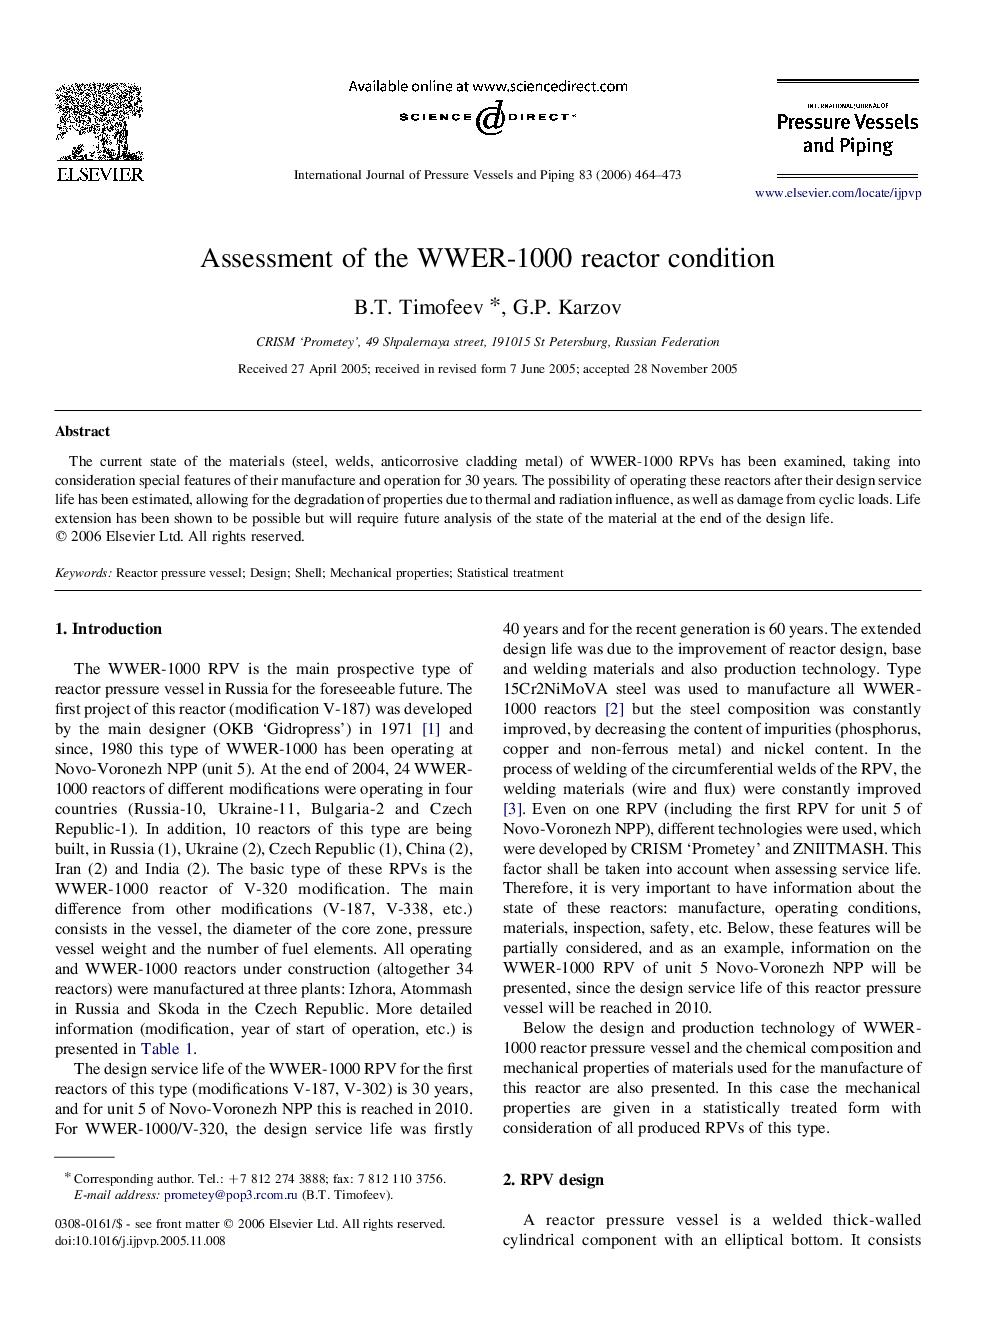 Assessment of the WWER-1000 reactor condition